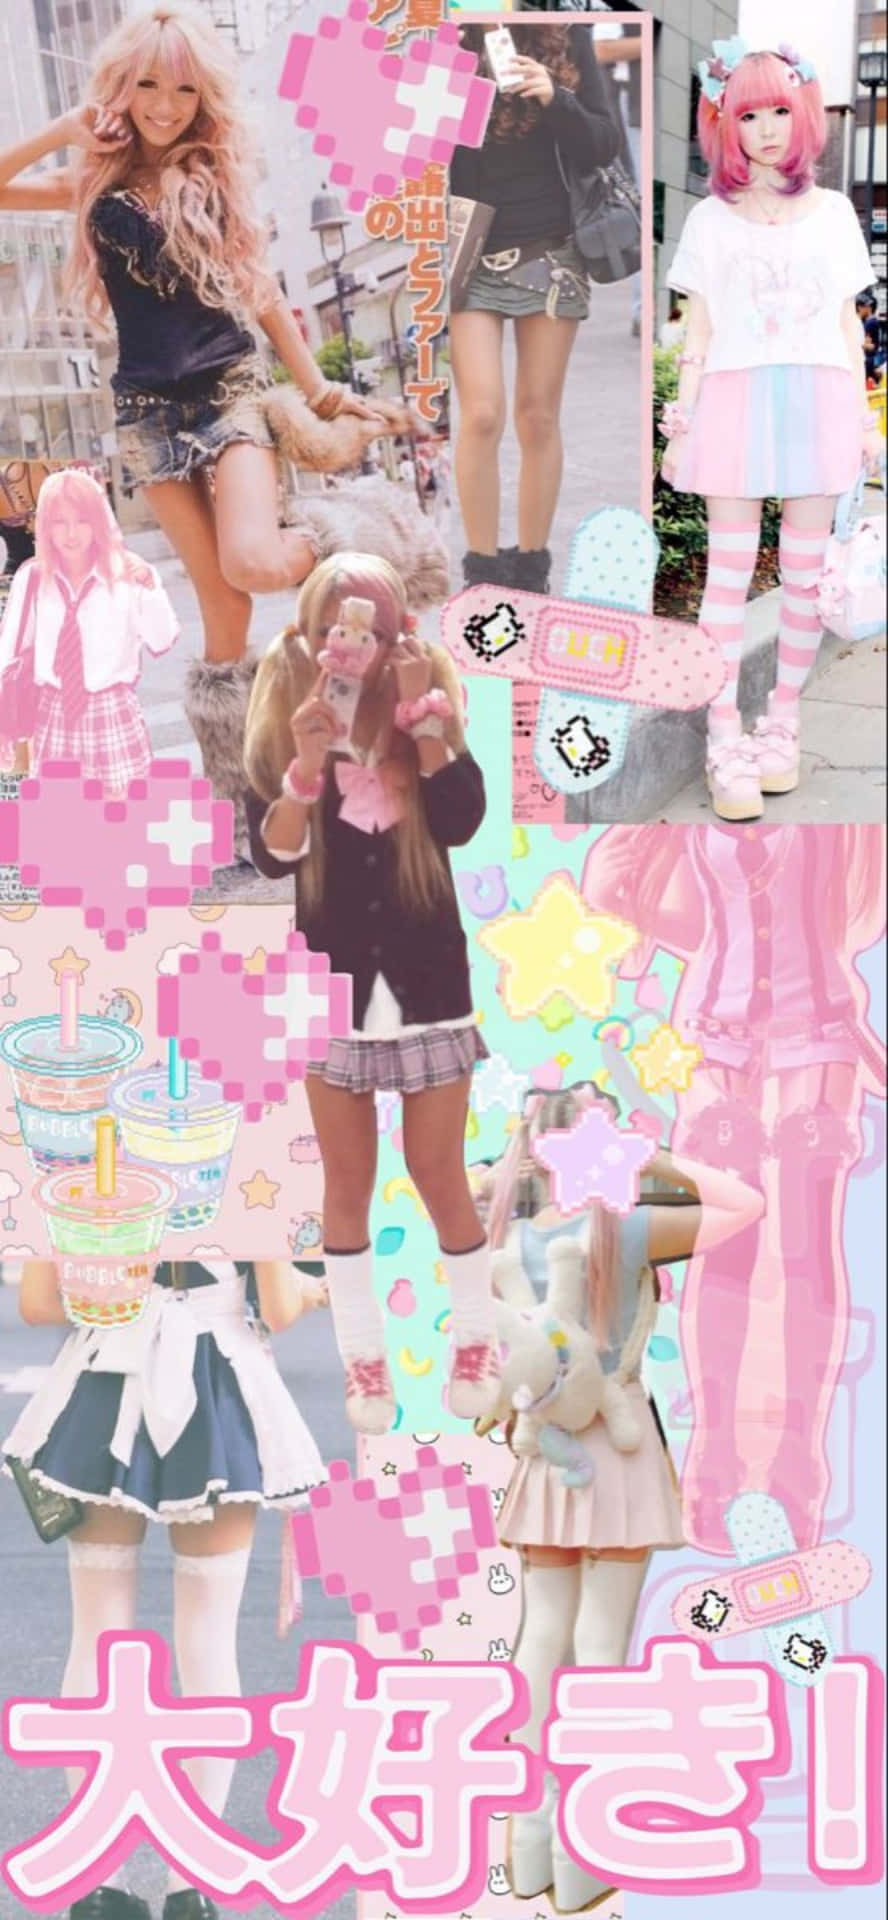 Caption: Glamorous Gyaru Girl Poses in Chic Outfit Wallpaper